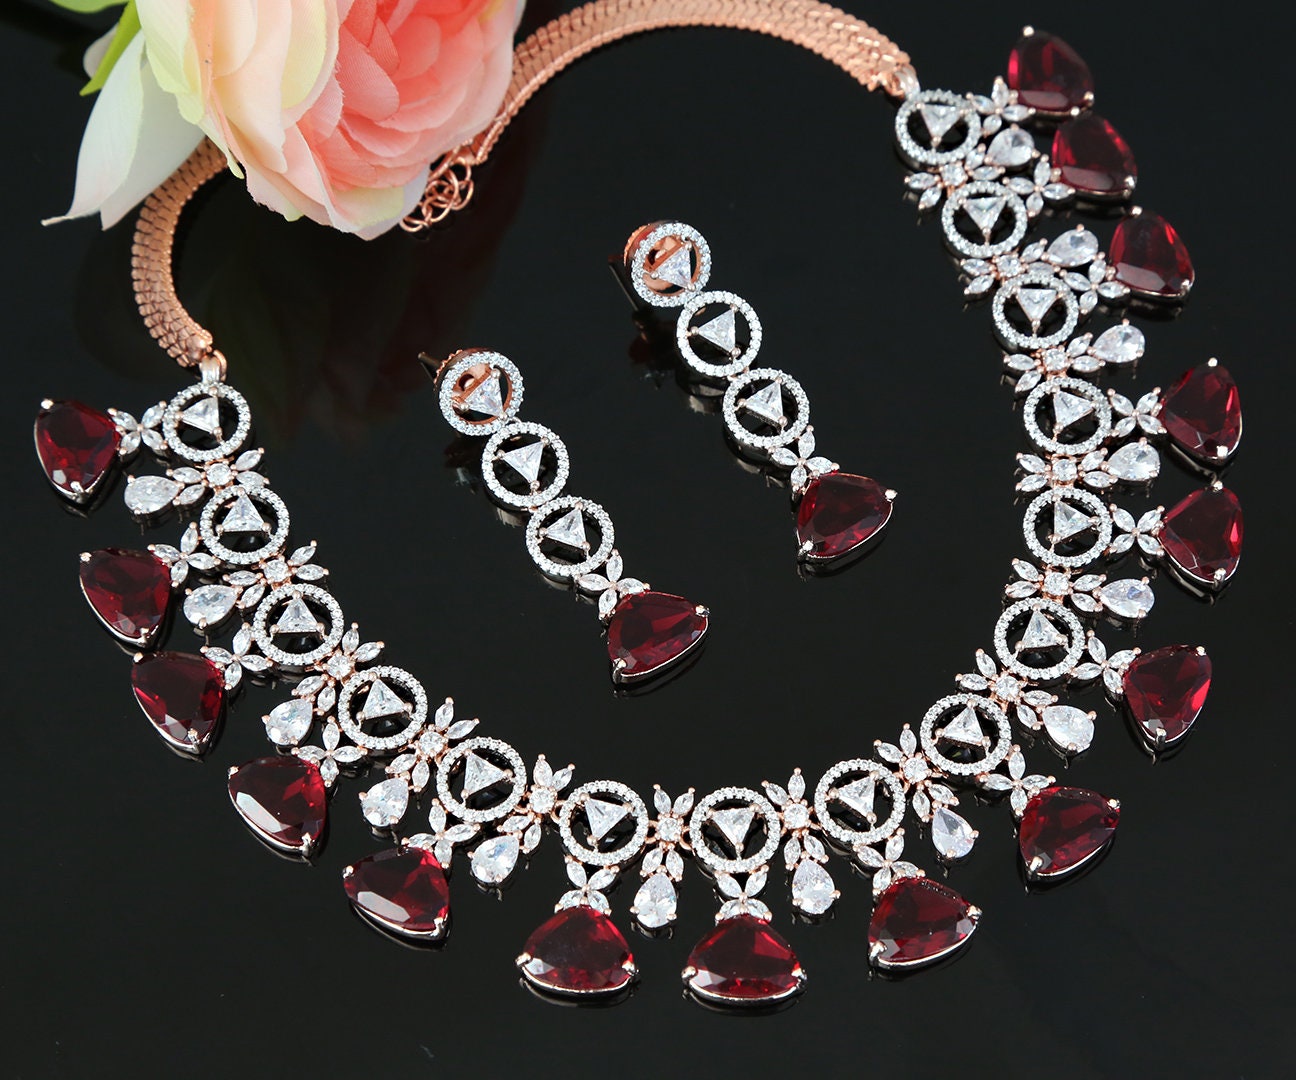 Unique Floral design American Diamond Necklace with Triangular shape Ruby and Clear stones | Rose gold Diamond necklace in Beautiful design